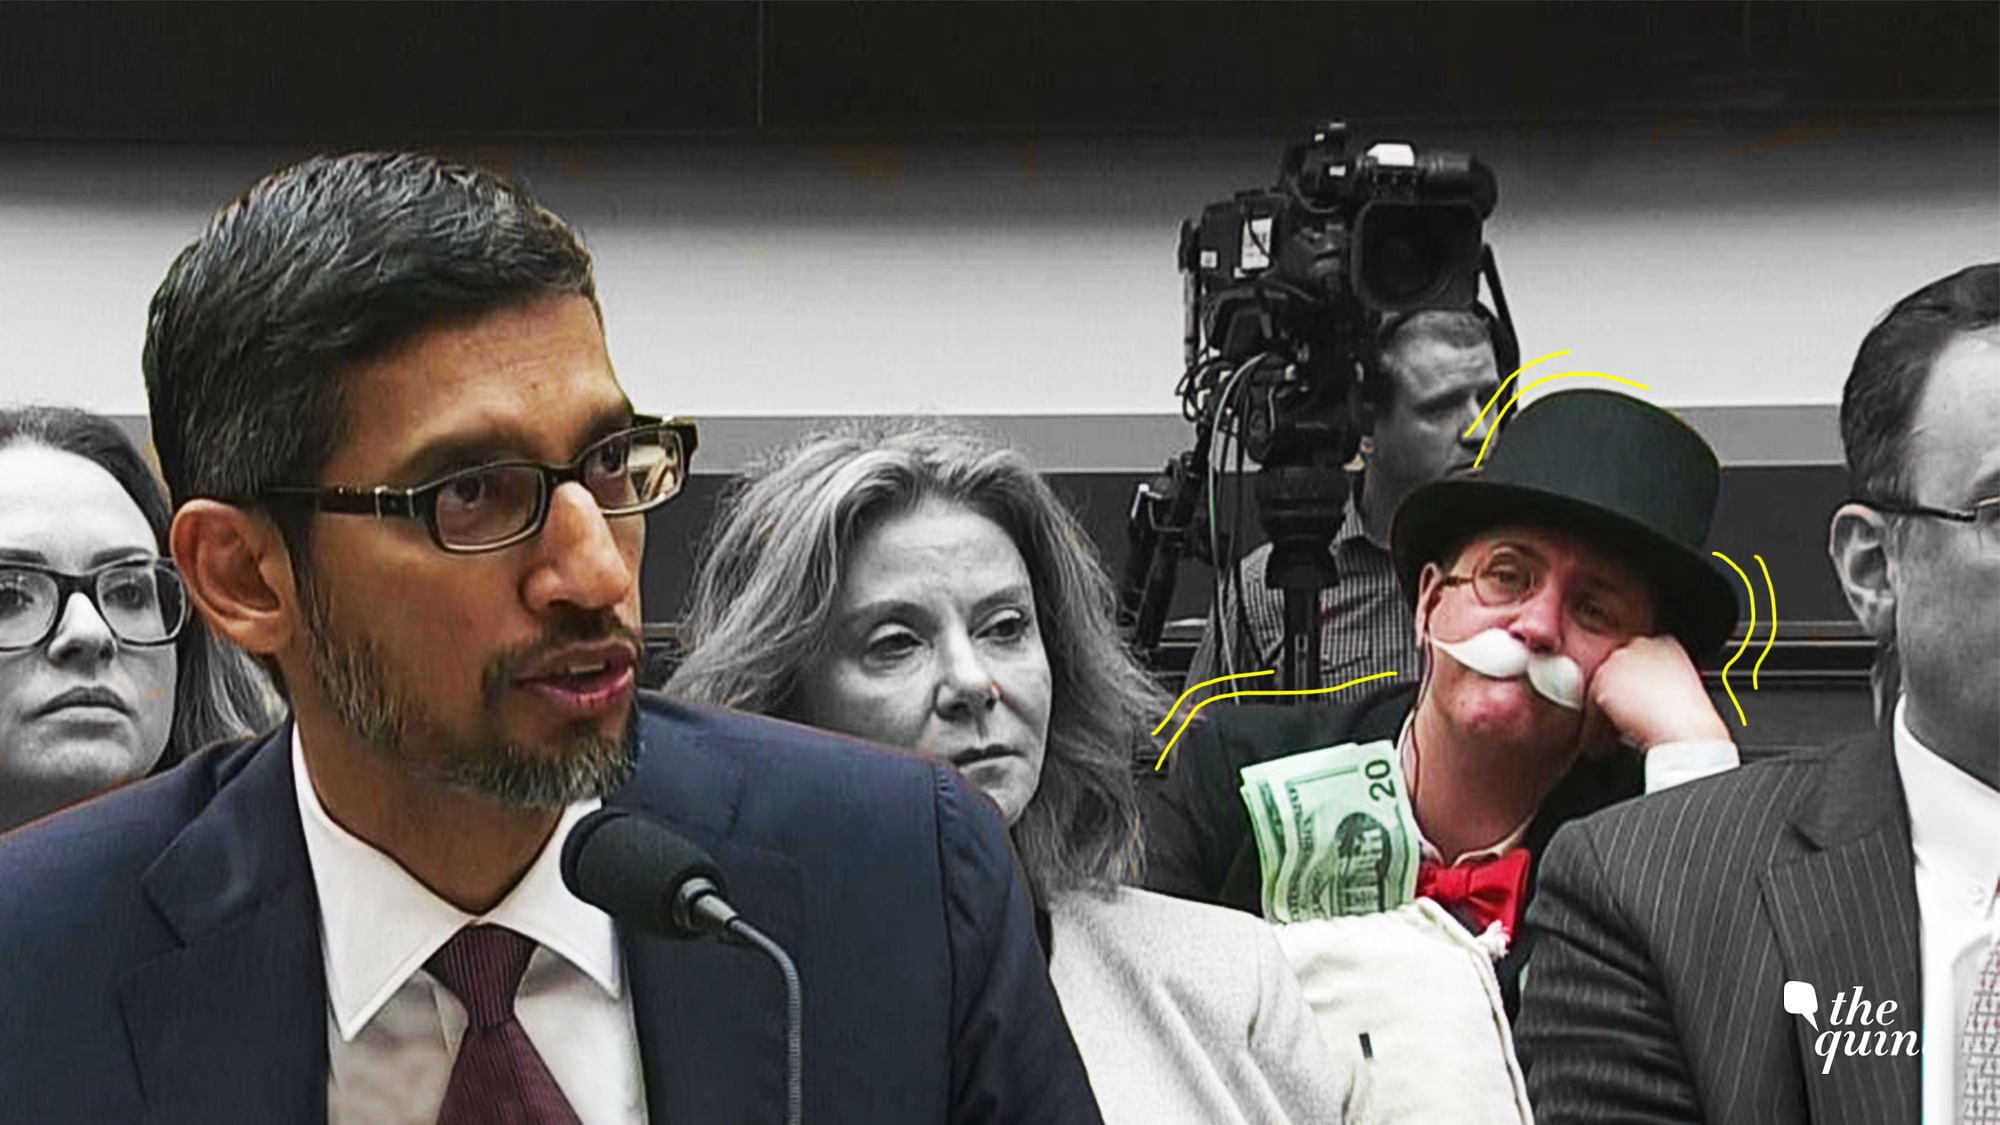 Google CEO Sundar Pichai was spectacularly photo-bombed by an activist dressed as the Monopoly Man.&nbsp;